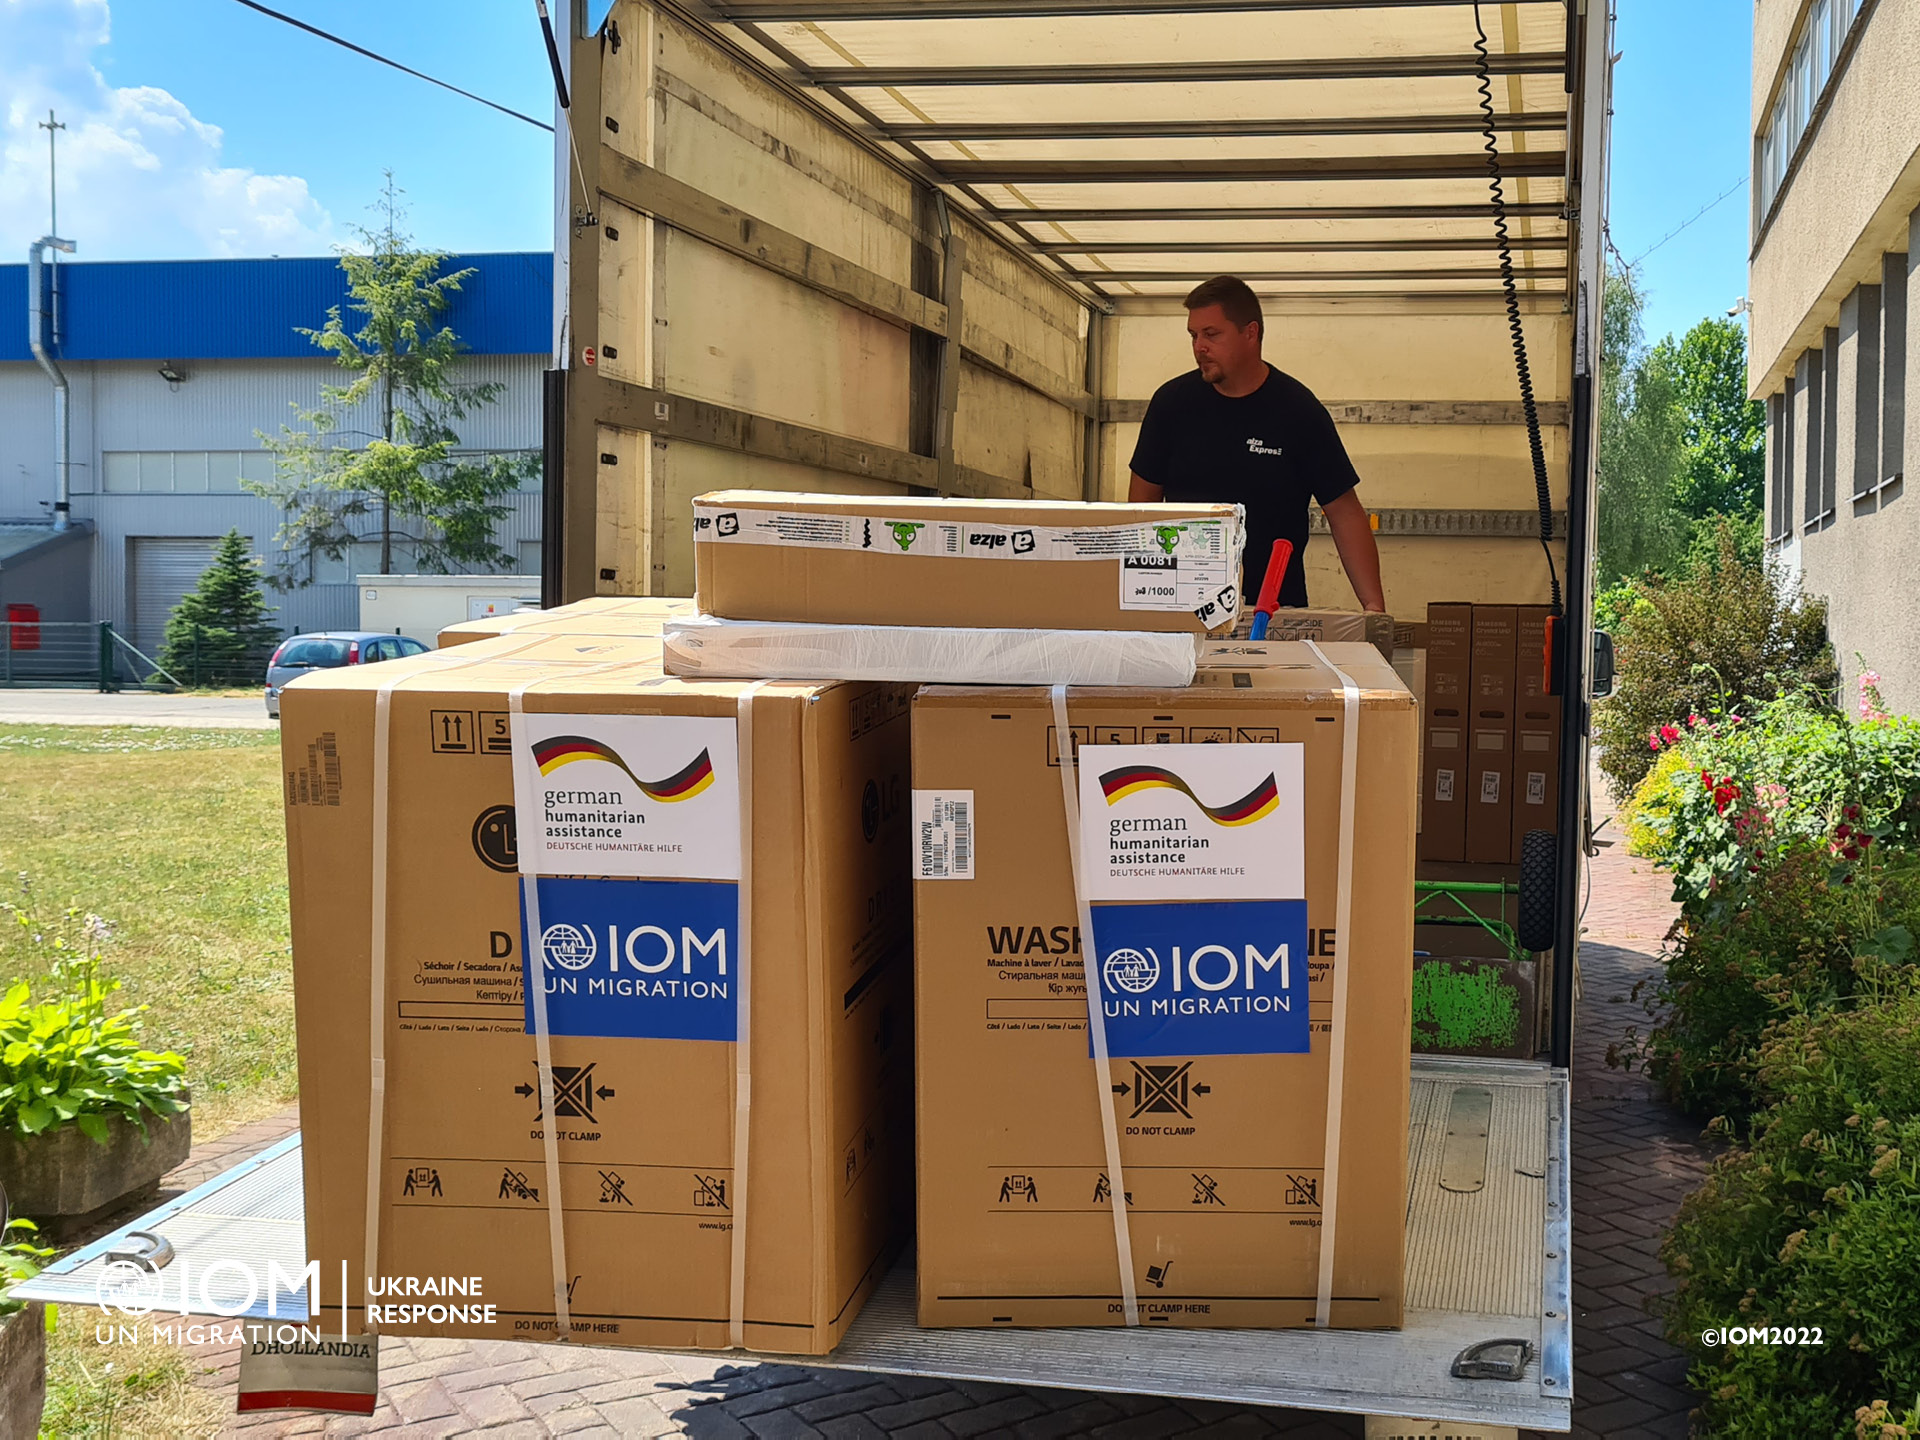 Laundry equipment and TVs delivery to the Accomodation Facility in Martin. Photo © International Organization for Migration (IOM) 2022.